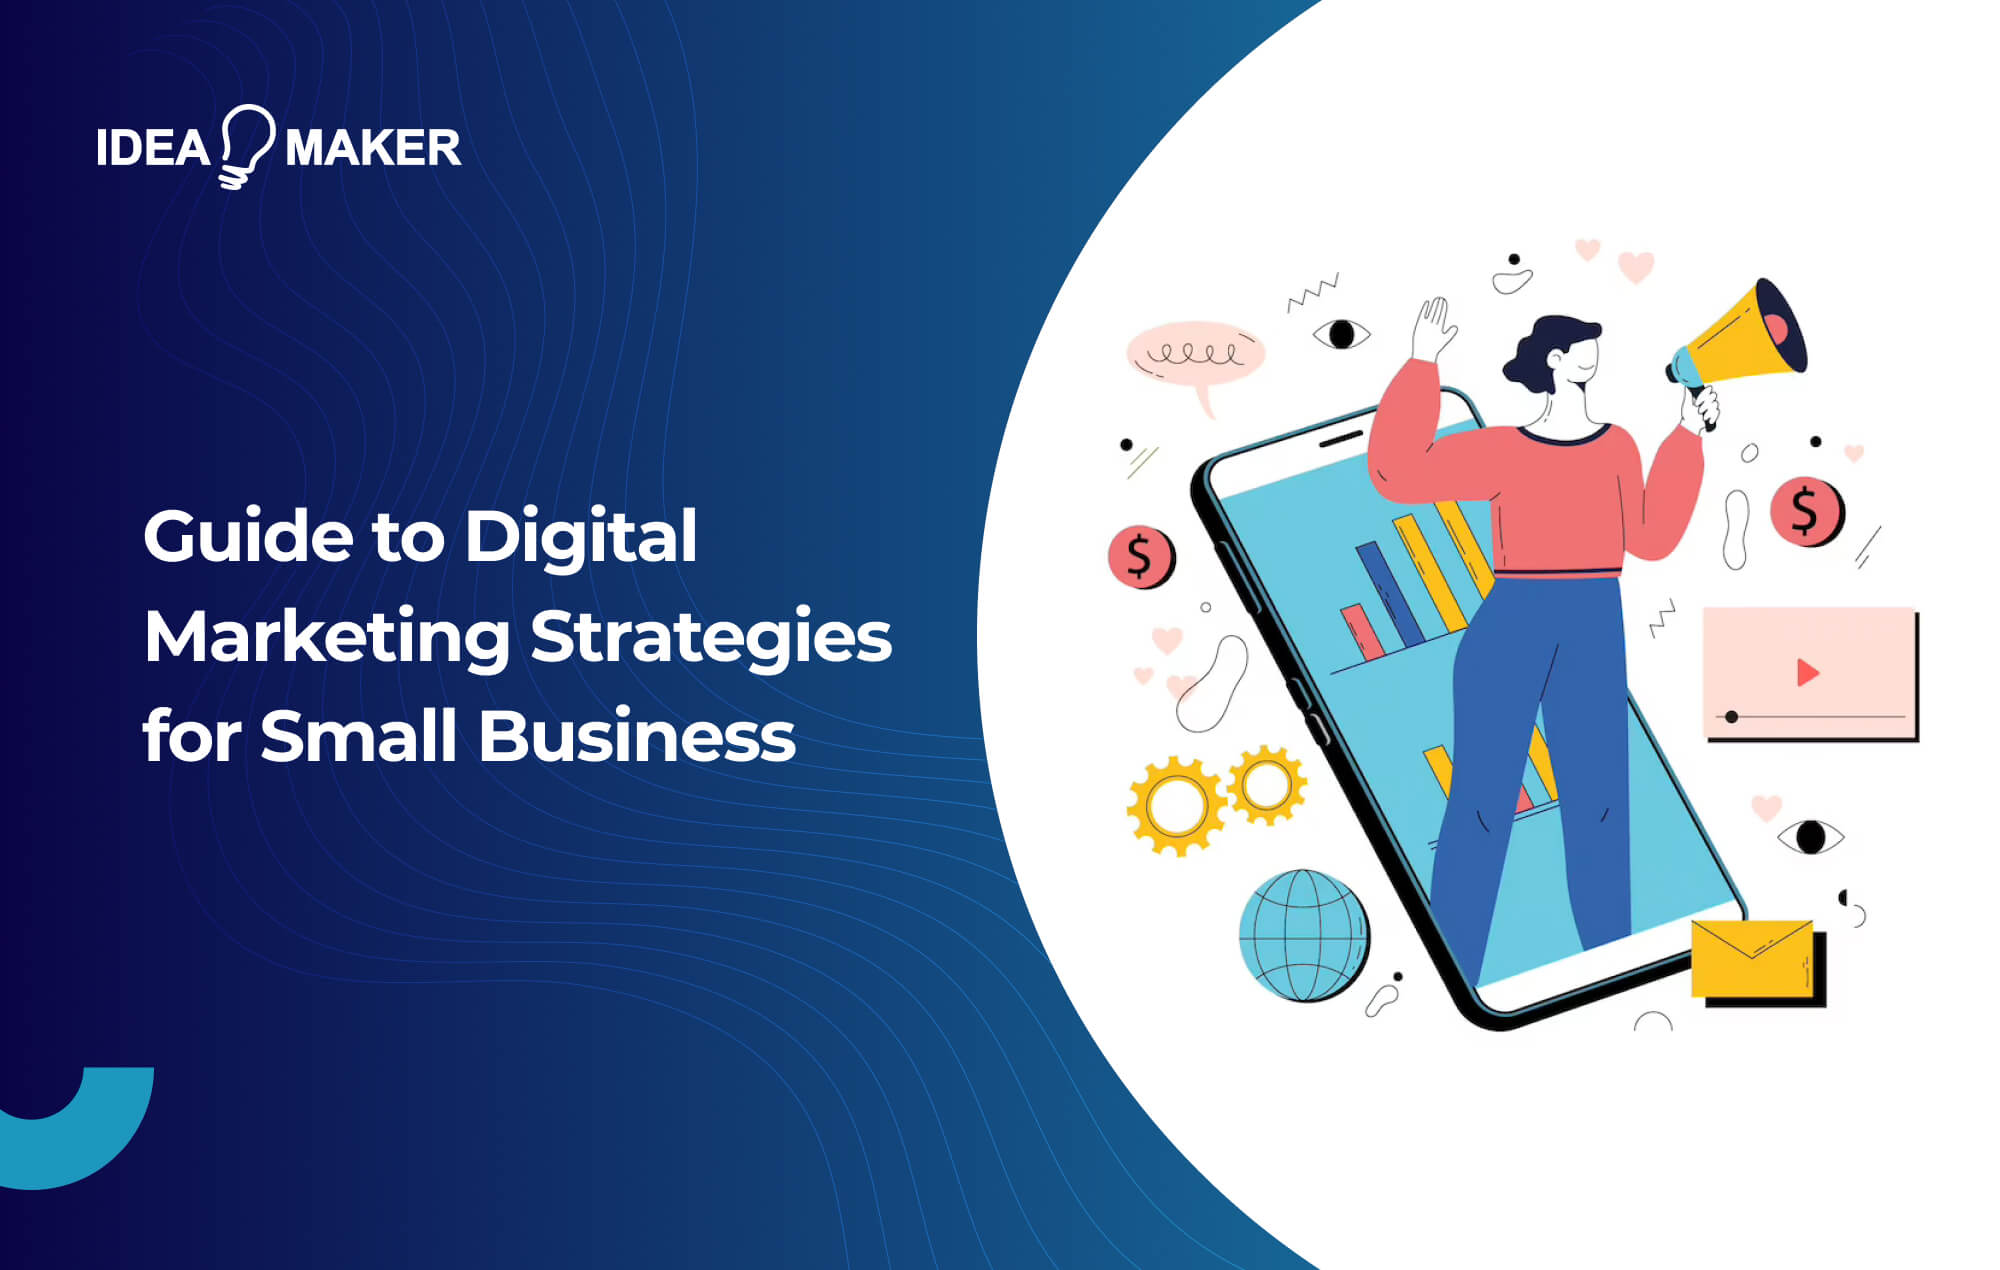 Ideamaker - Guide to Digital Marketing Strategies for Small Business